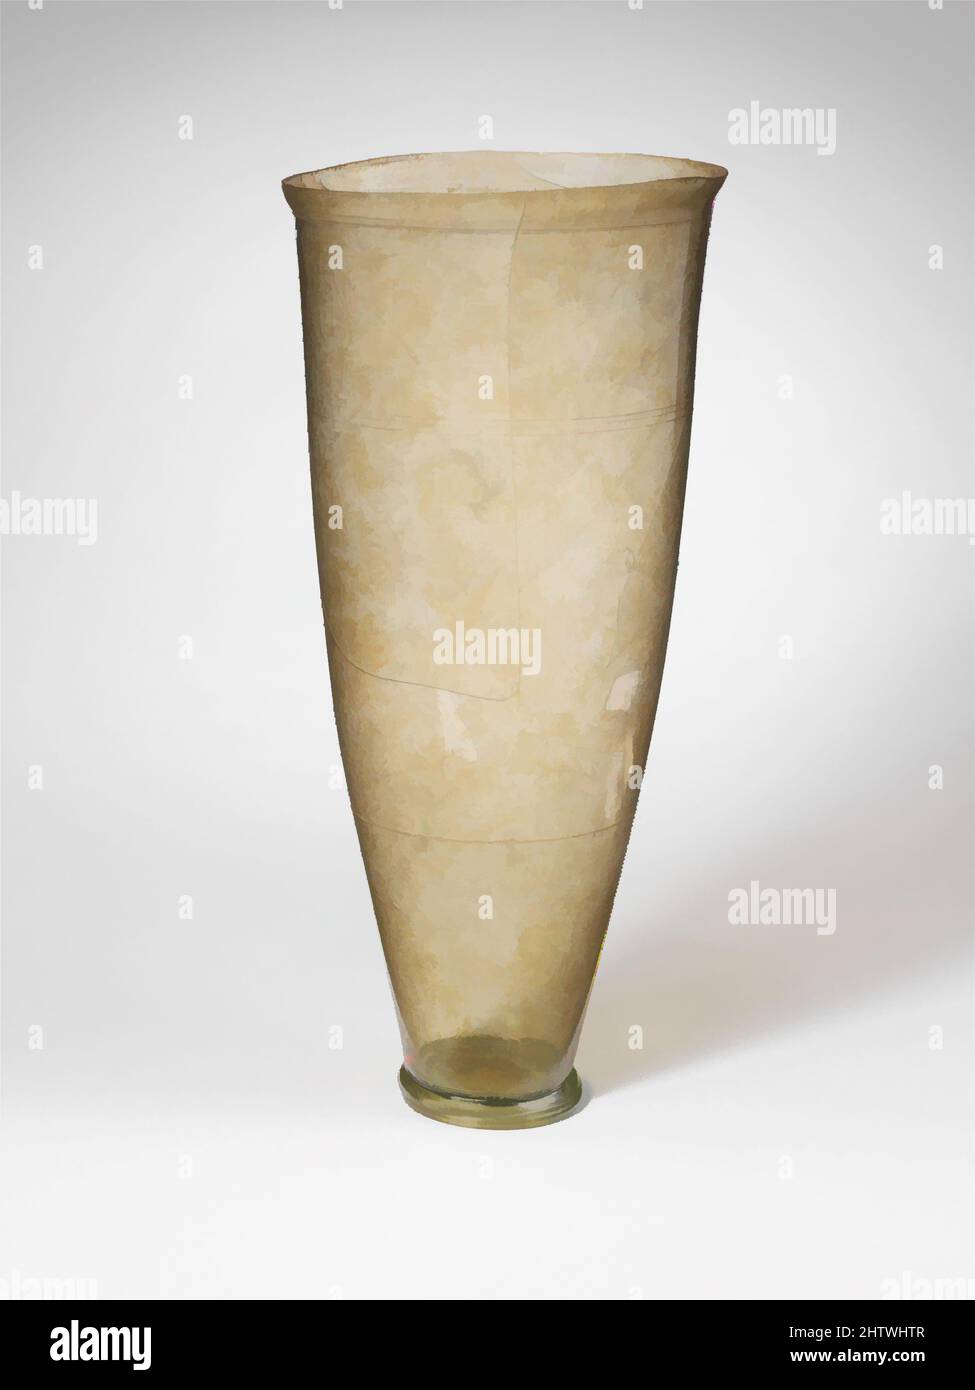 Art inspired by Glass beaker, Late Imperial, 3rd–4th century A.D., Roman, Glass; blown and cut, H.: 8 1/4 in. (21 cm), Glass, Colorless; base ring with green tinge. Bulging rim, cracked off unevenly; tall body with side tapering downwards; low, solid, base ring applied as a coil and, Classic works modernized by Artotop with a splash of modernity. Shapes, color and value, eye-catching visual impact on art. Emotions through freedom of artworks in a contemporary way. A timeless message pursuing a wildly creative new direction. Artists turning to the digital medium and creating the Artotop NFT Stock Photo